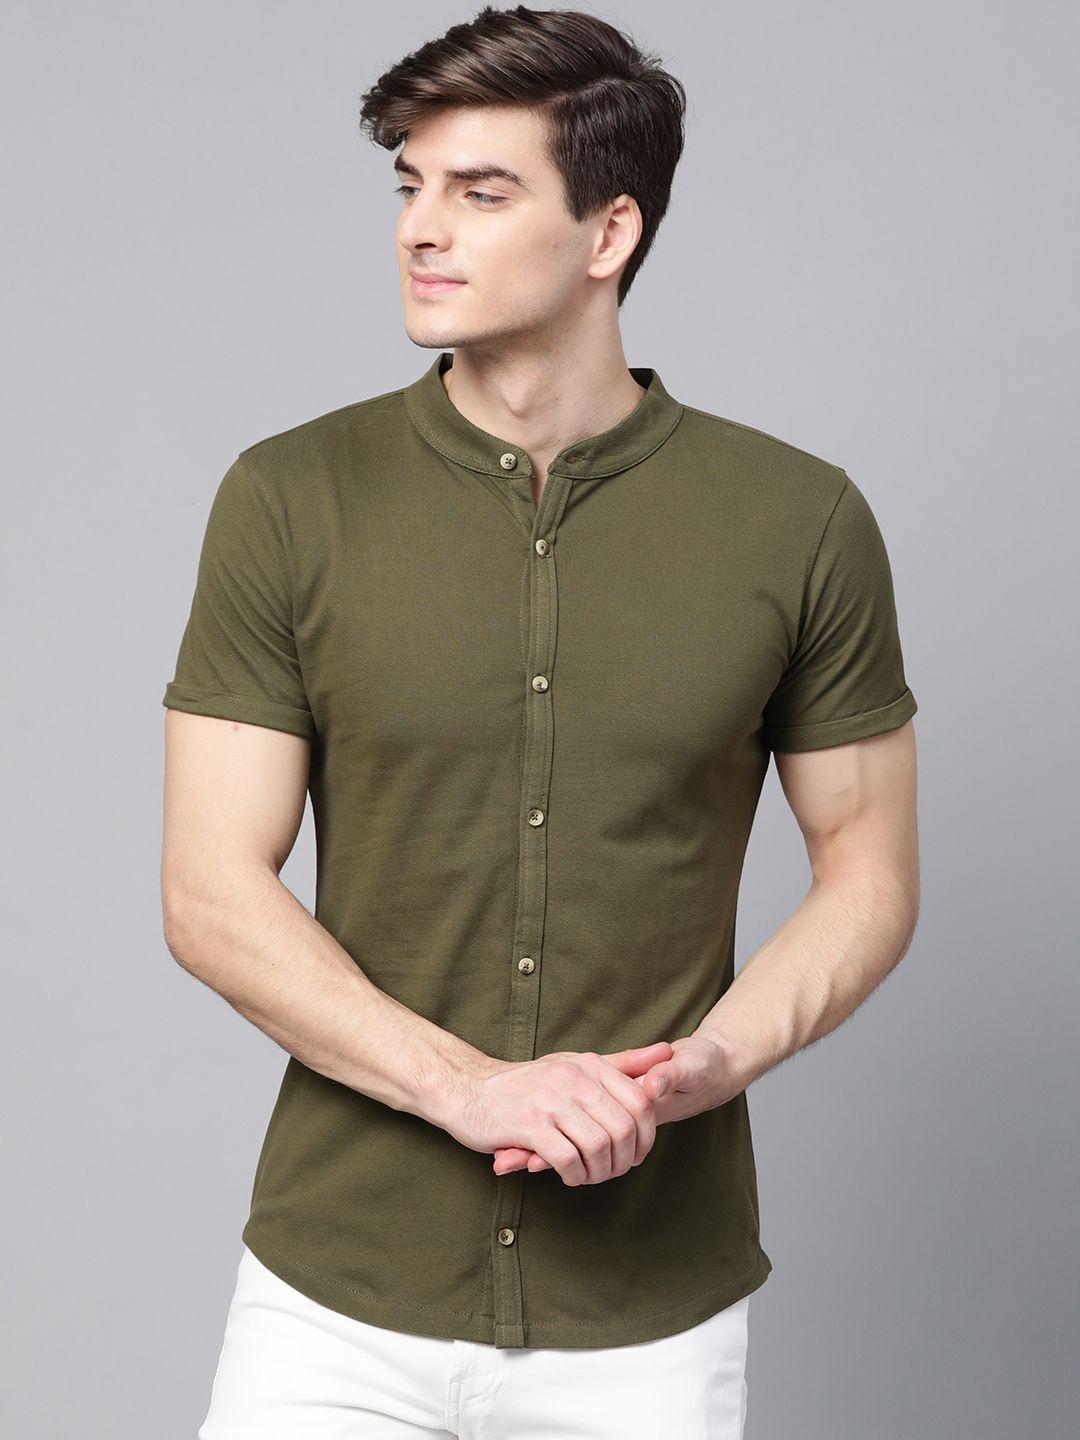 manq men olive green slim fit solid knitted casual shirt